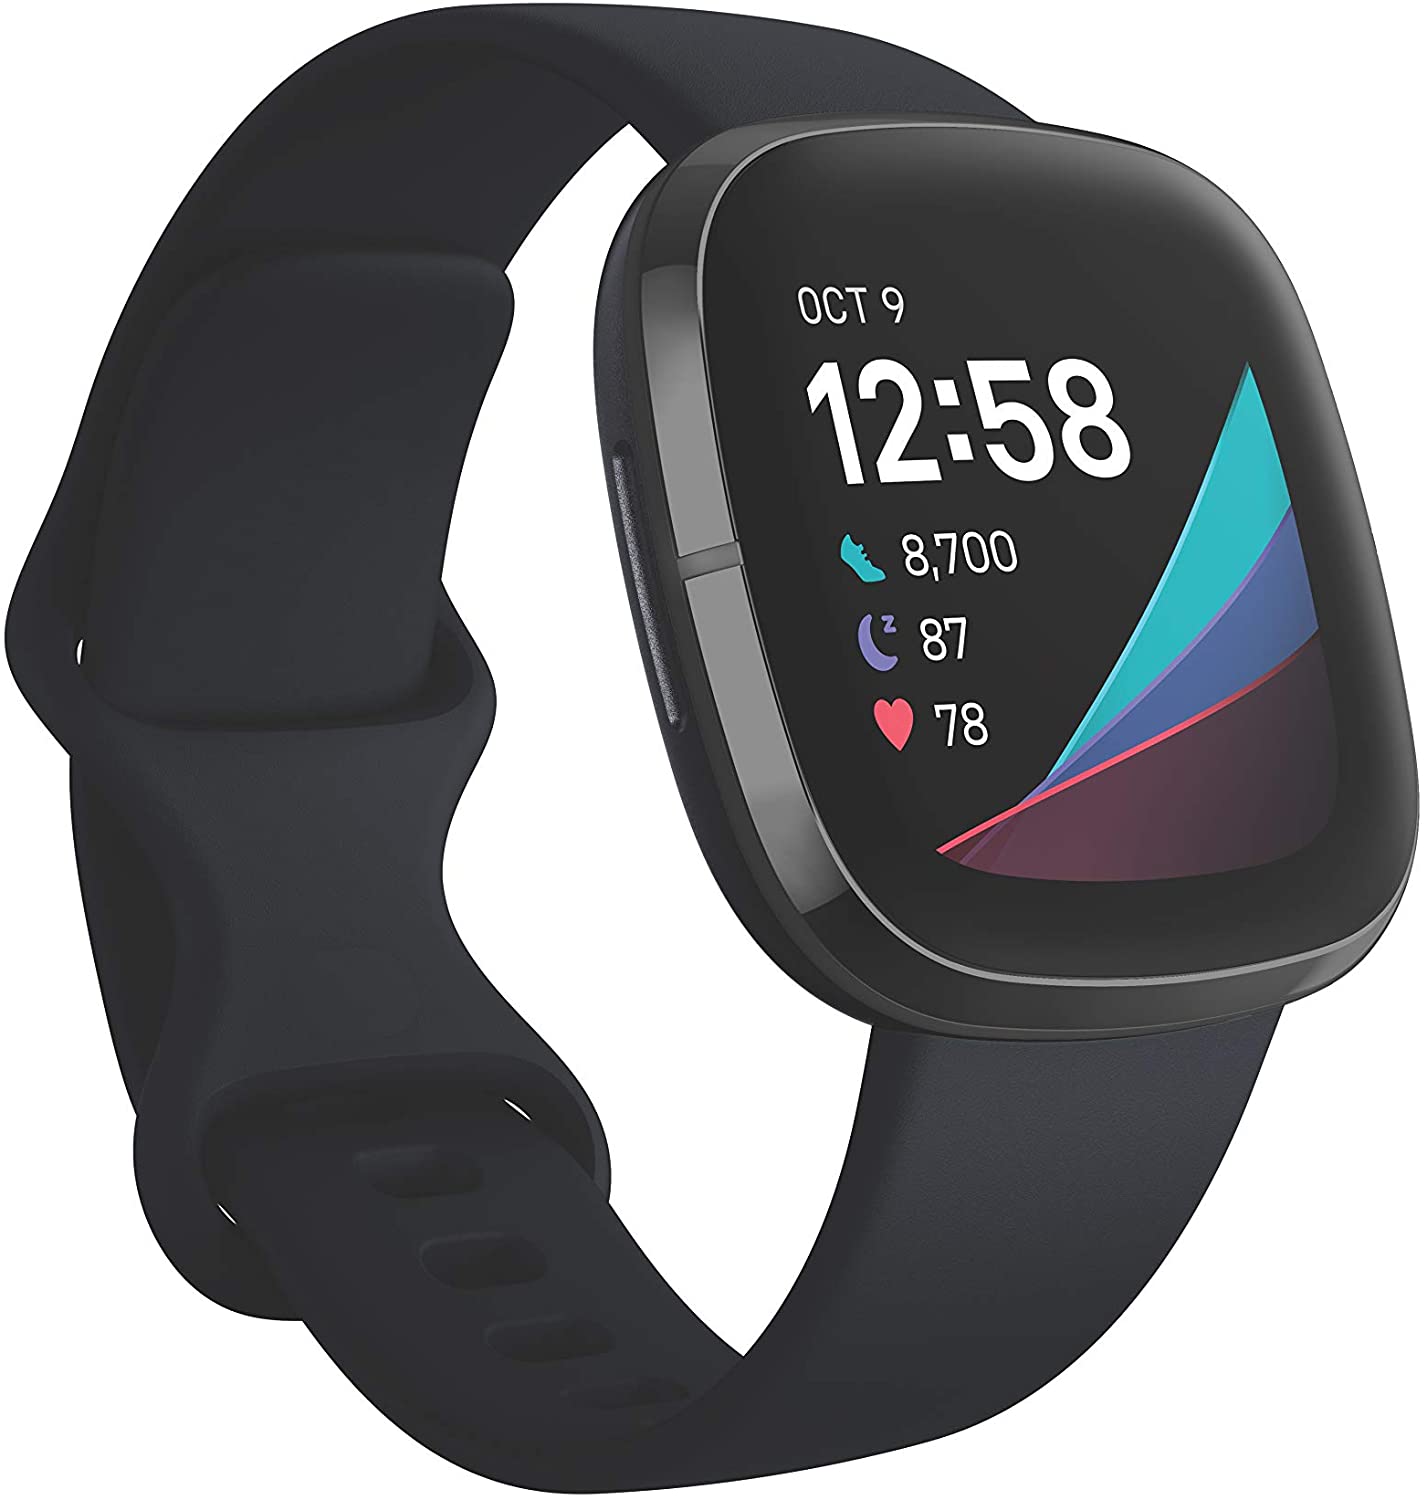 black smart watch with a digital display used for counting calories